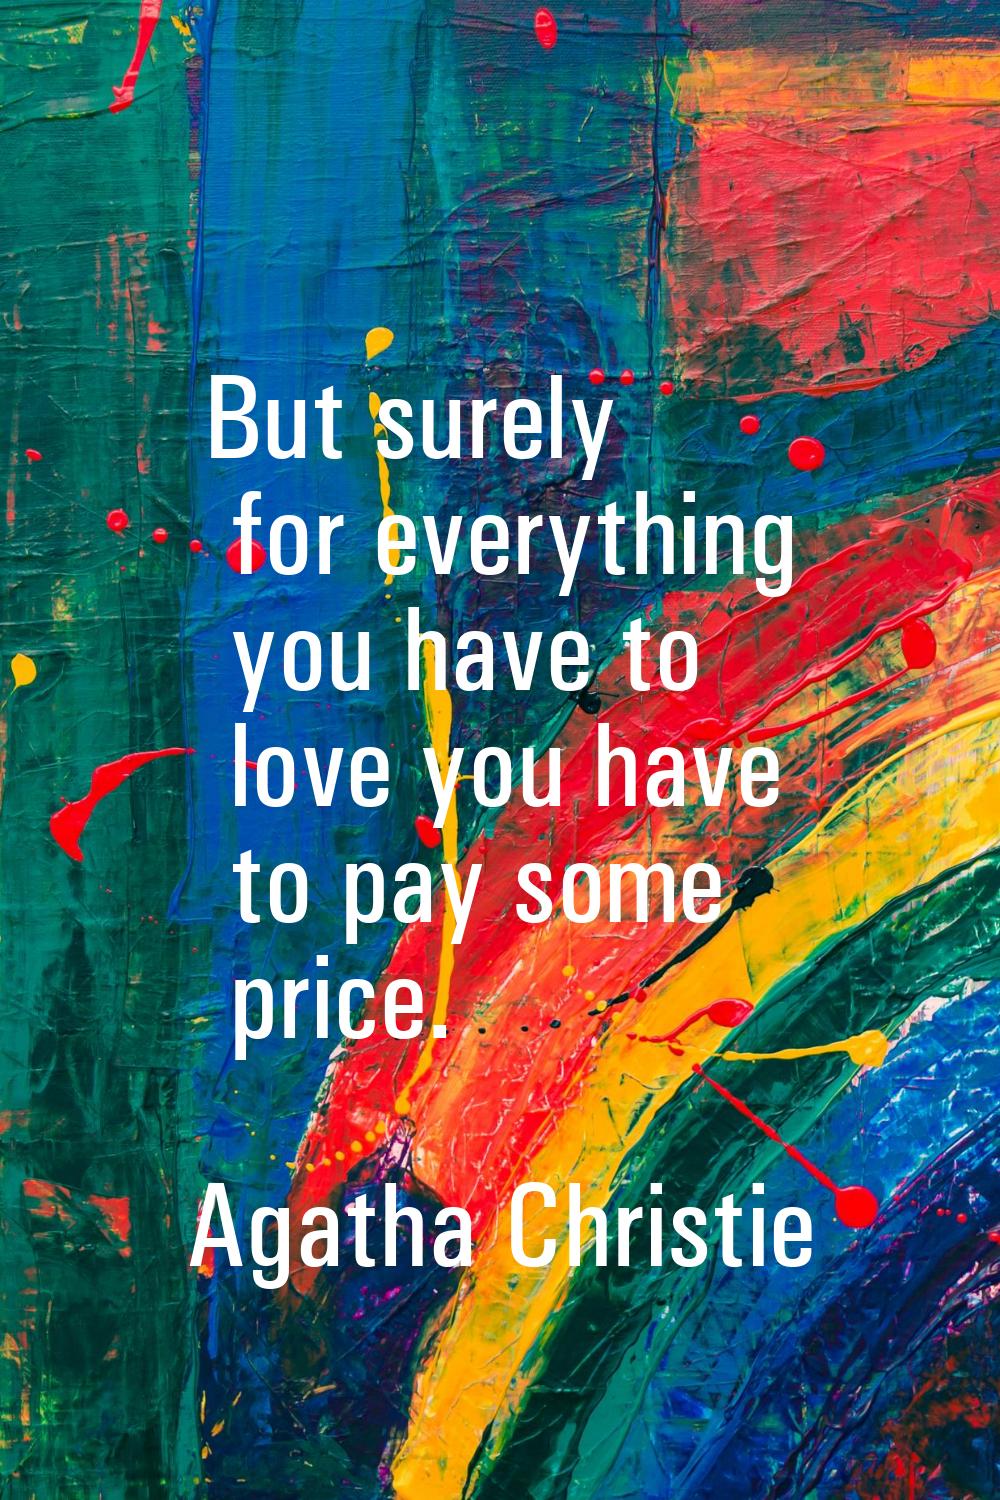 But surely for everything you have to love you have to pay some price.